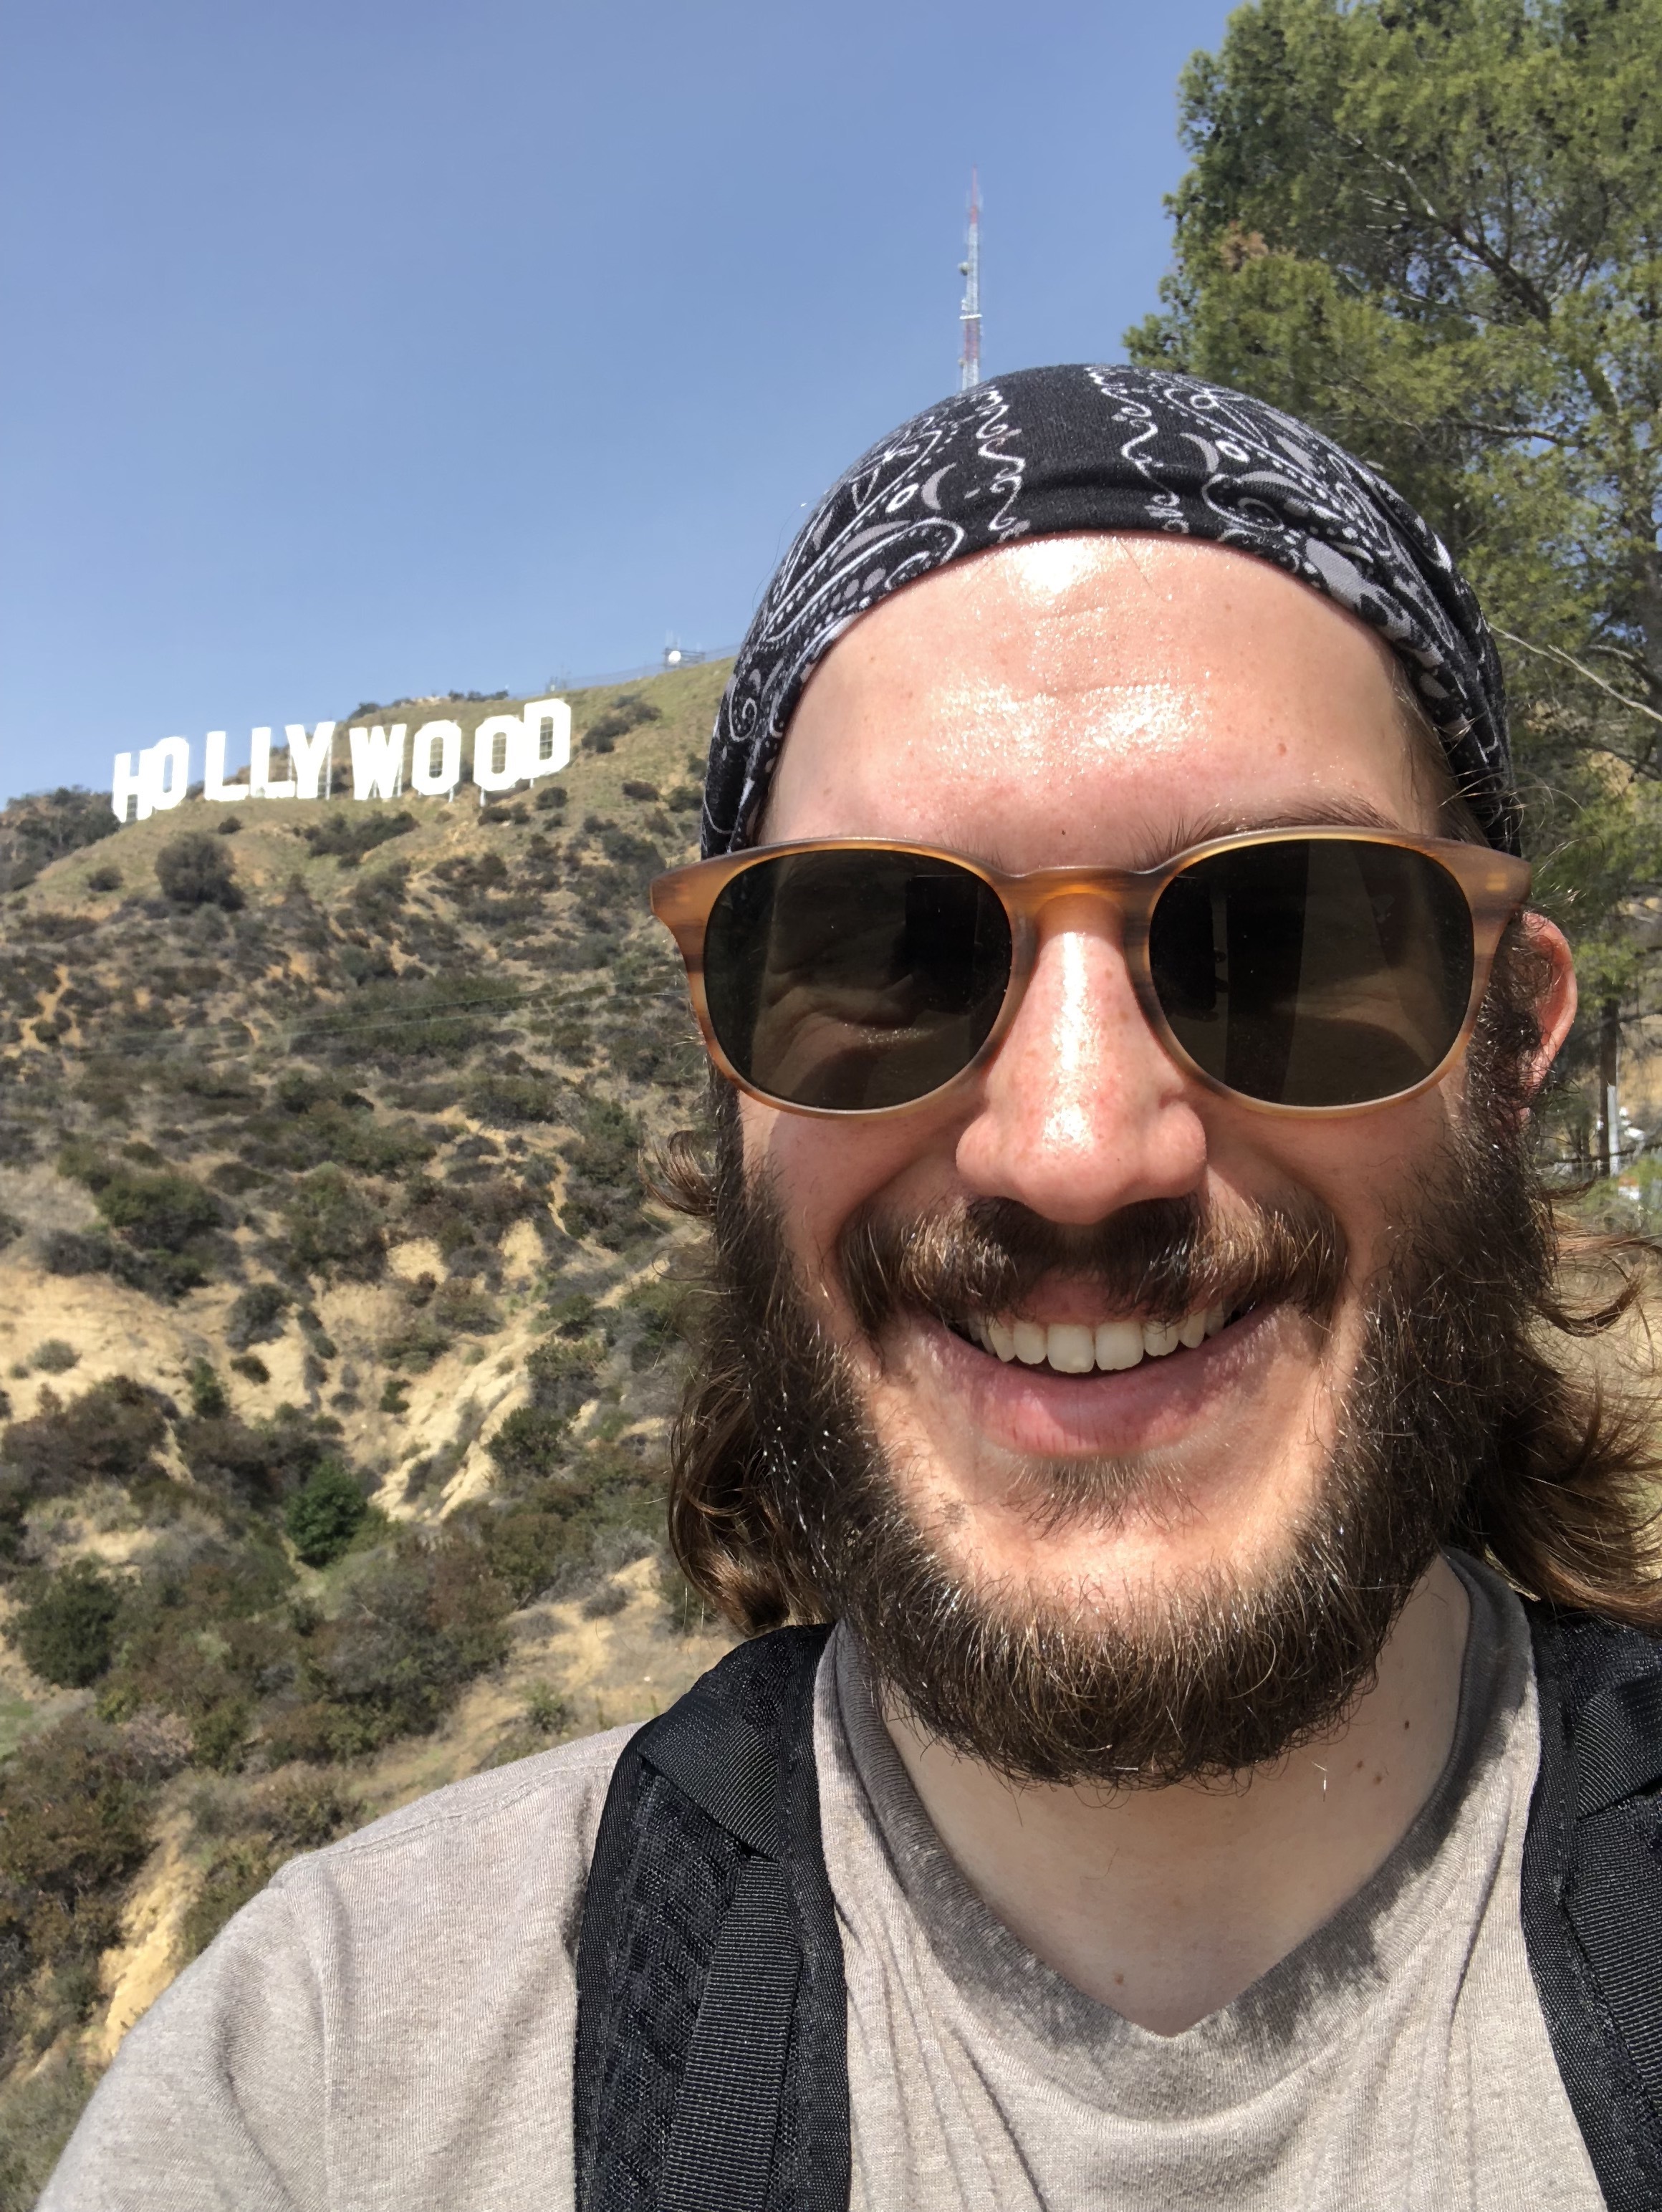 Dana in front of the Hollywood Sign